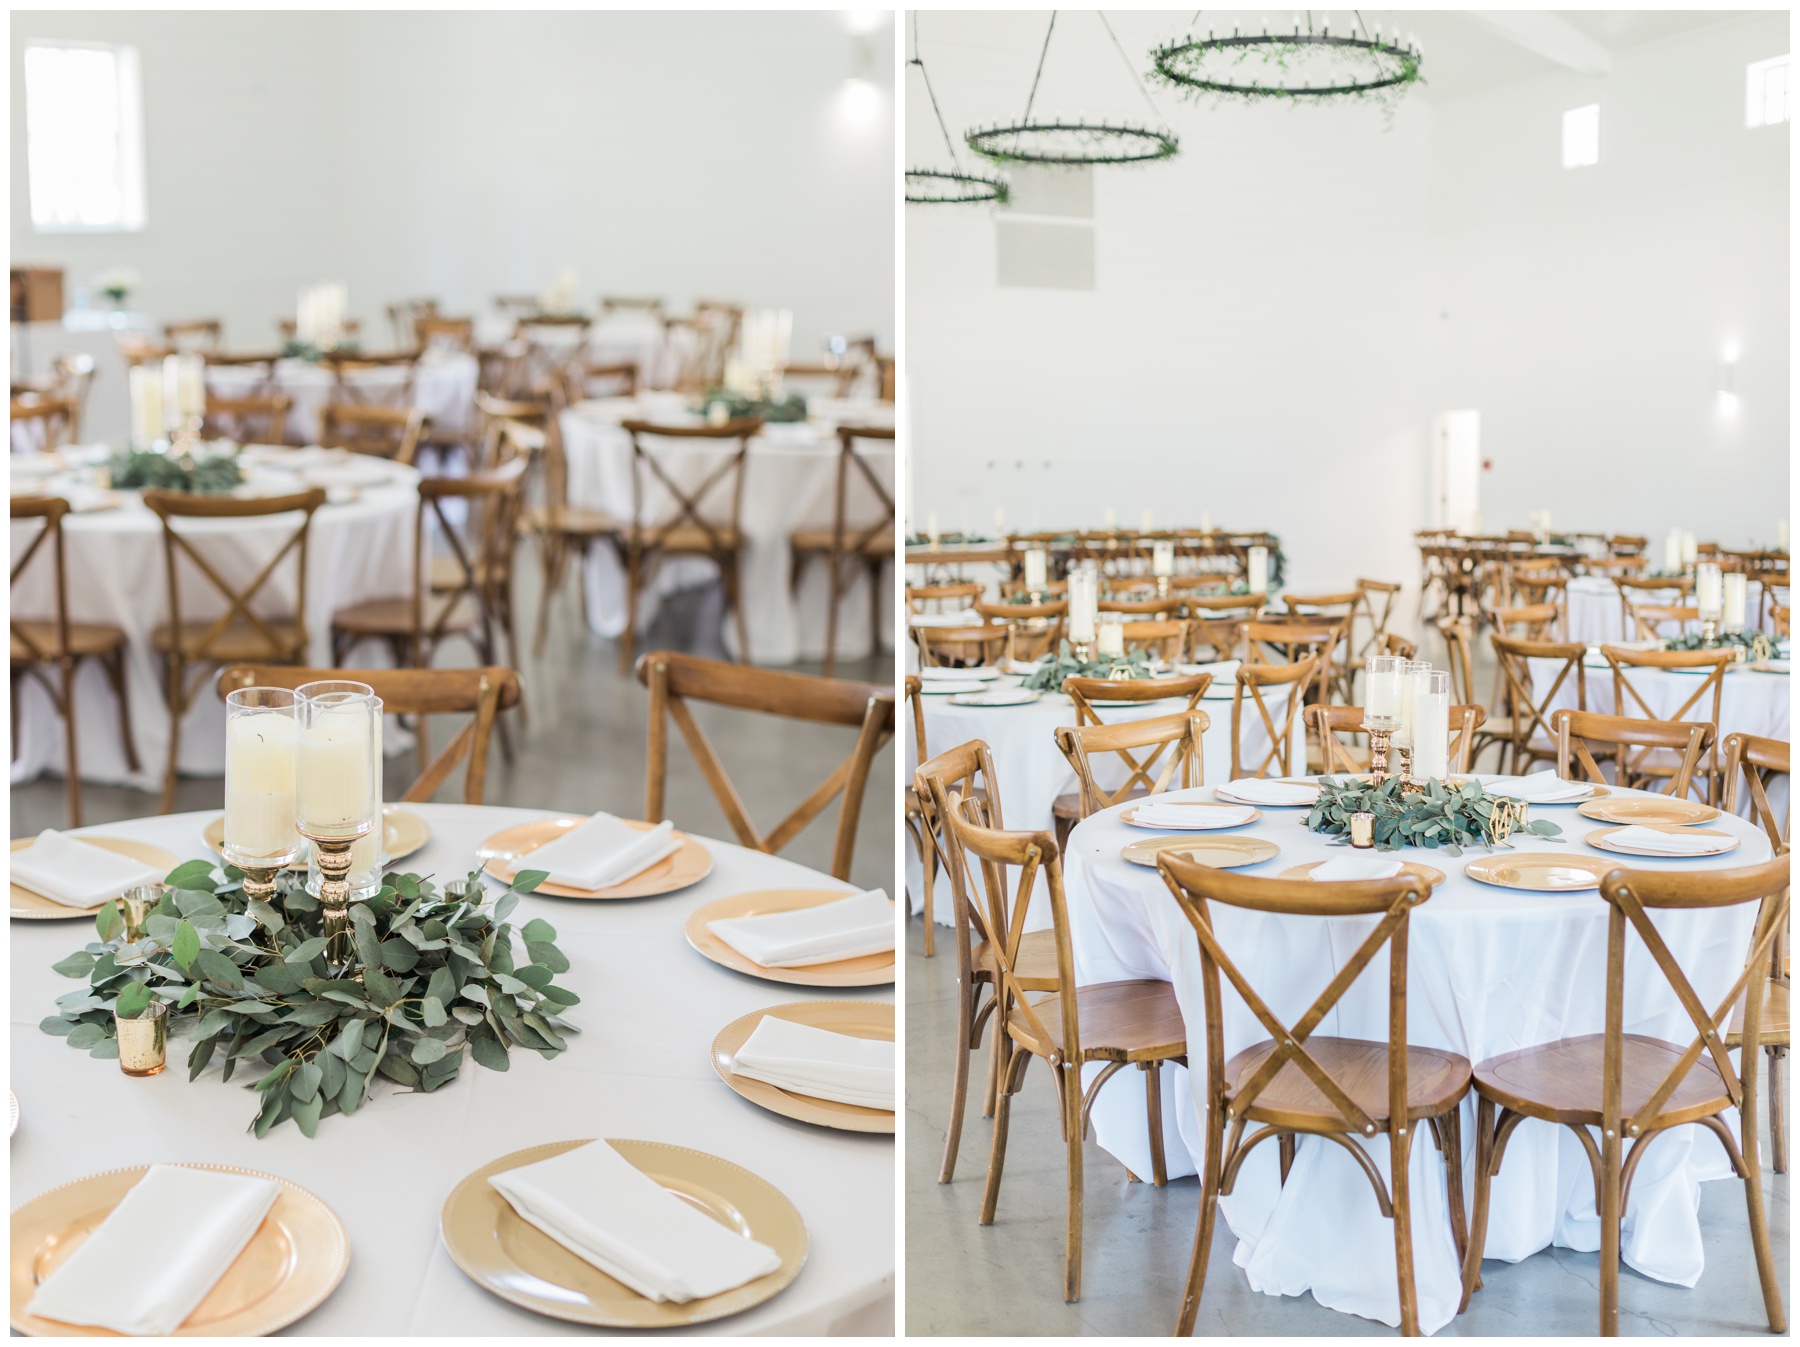 Gold plates, white and gold candles, and a eucalyptus runner for a modern wedding reception